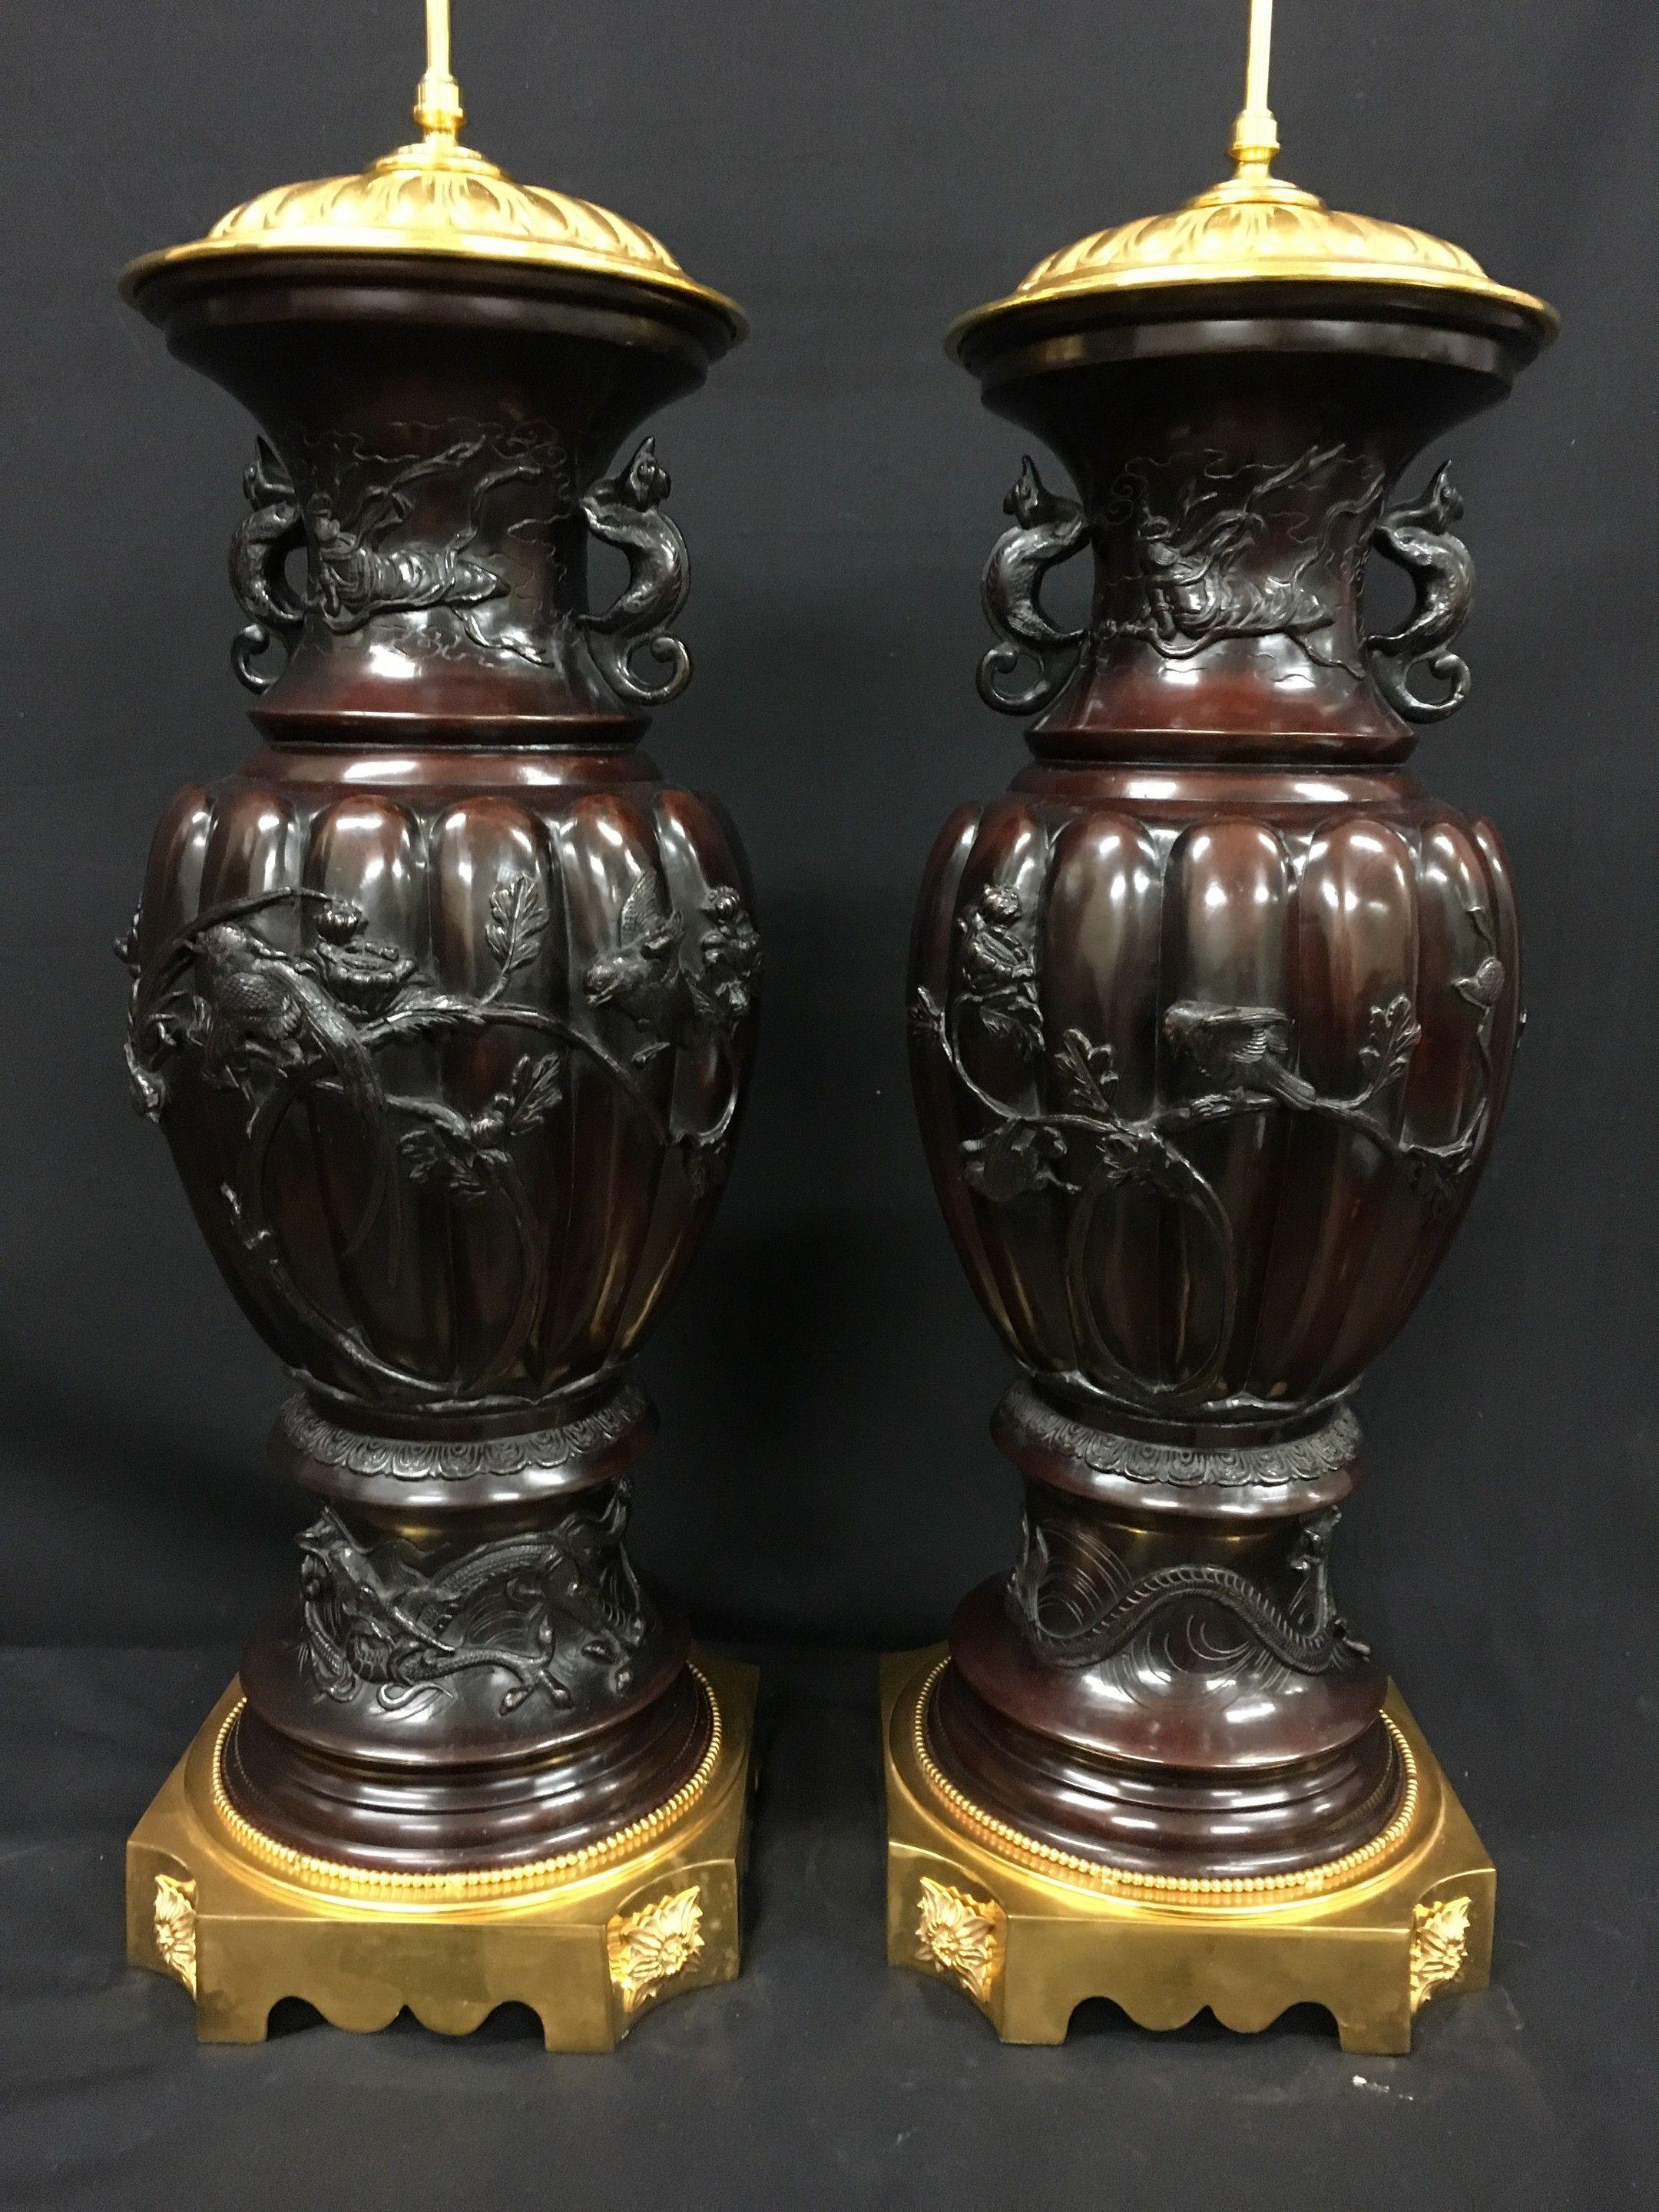 26 Great Antique Small Chinese Vases 2024 free download antique small chinese vases of antique japanese vases the uks premier antiques portal online with regard to pair large japanese bronze vases lamps